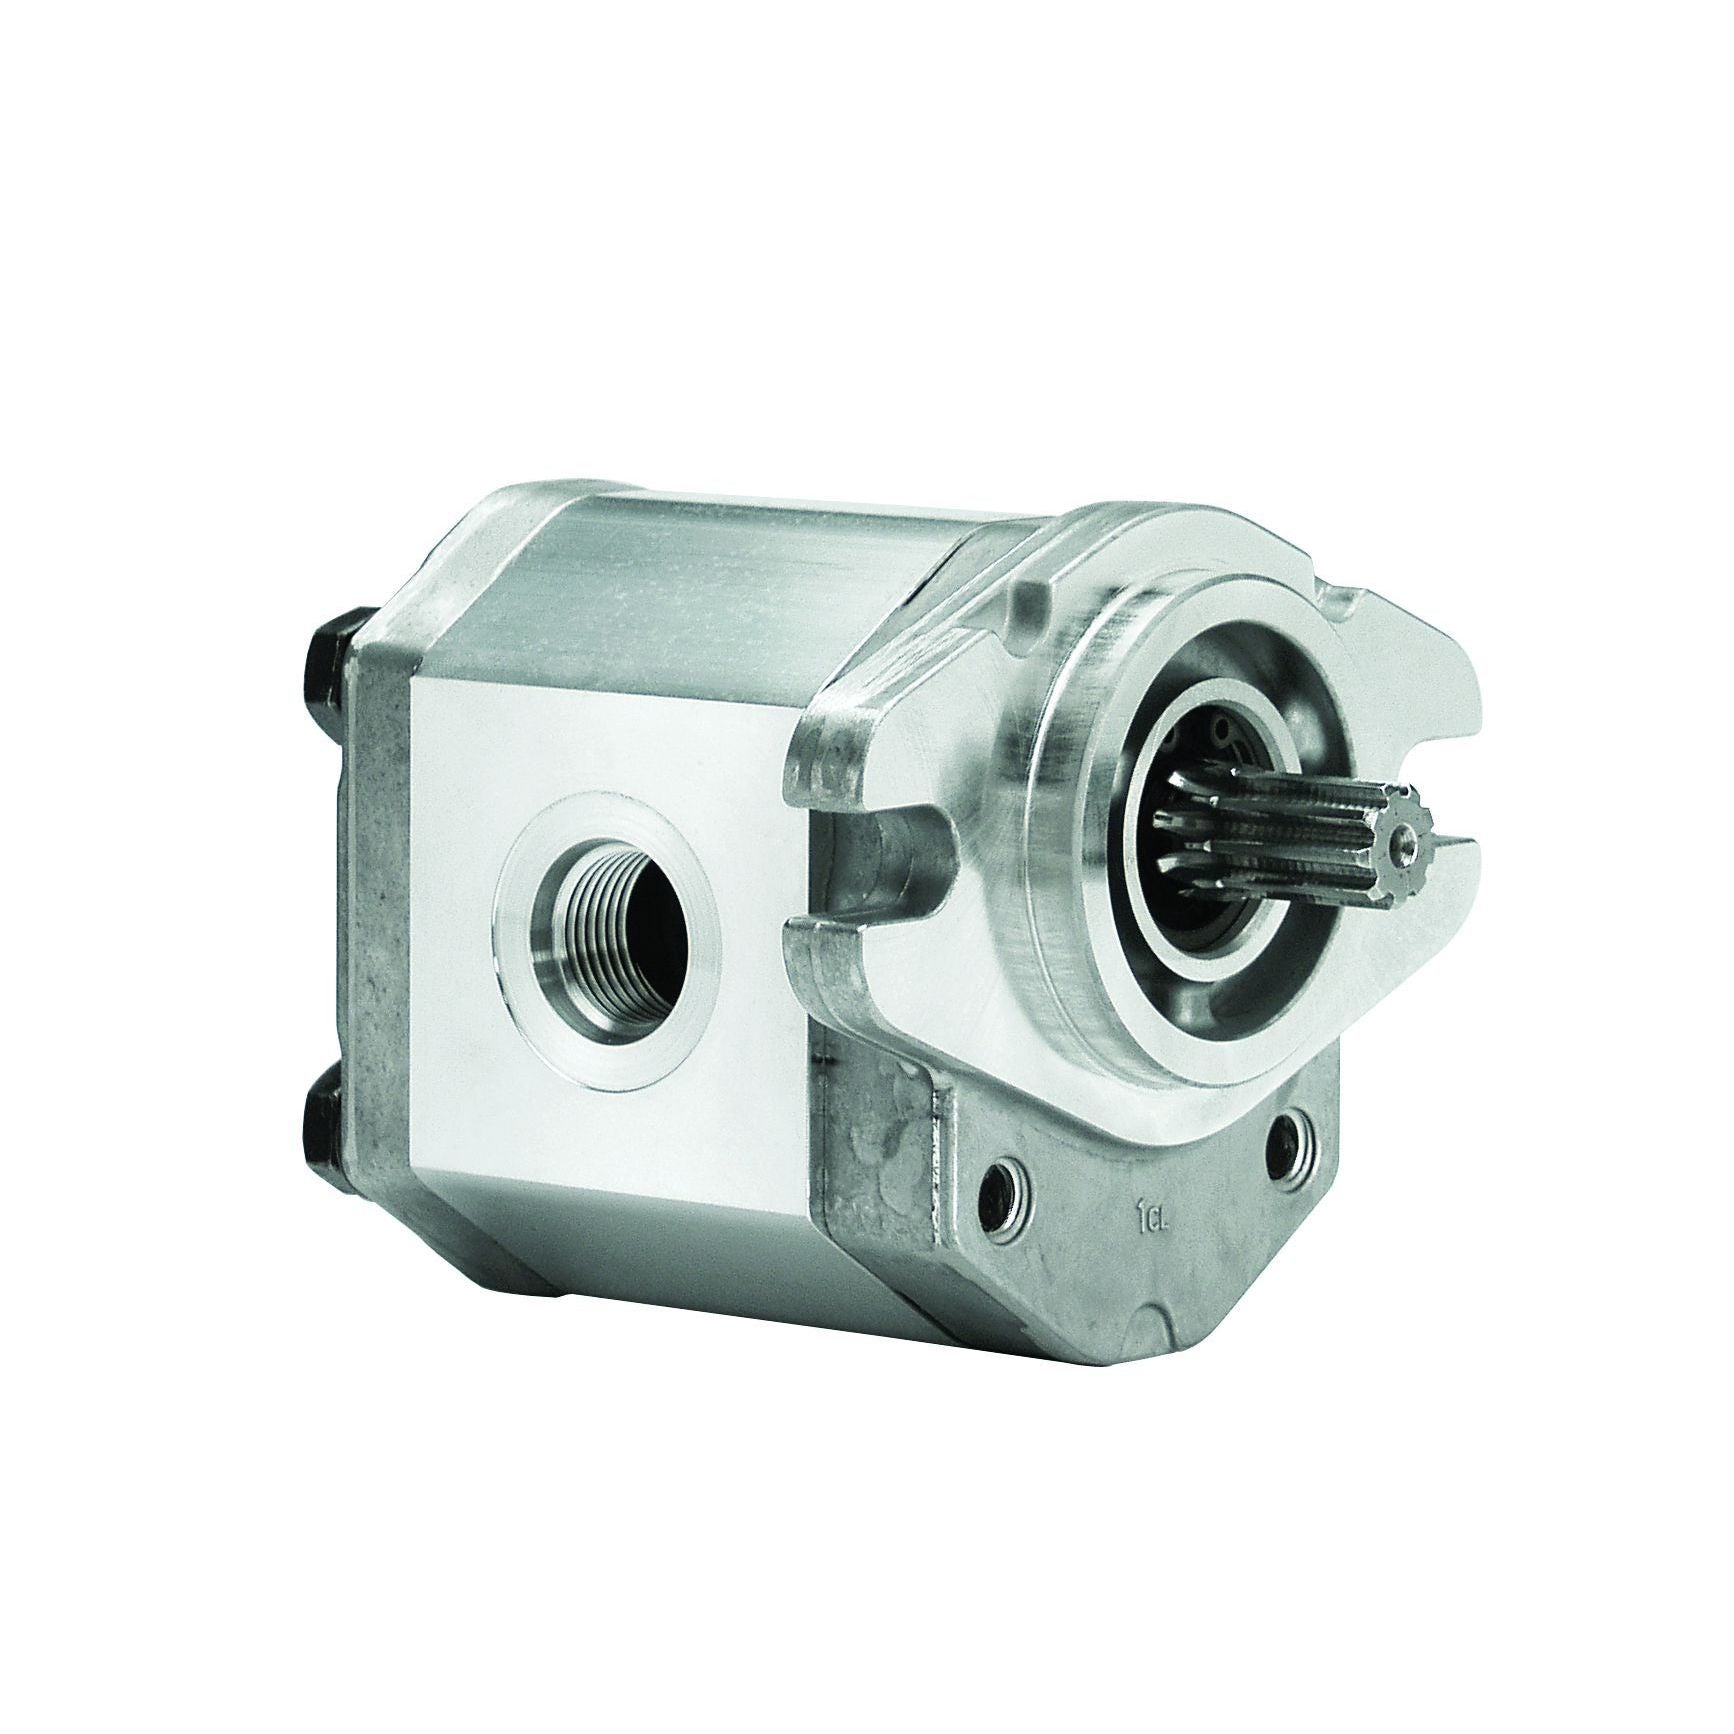 ALP2A-S-50-S1 : Marzocchi Gear Pump, CCW, 35.2cc (2.1472in3), 16.73 GPM, 2030psi, 2000 RPM, #12 SAE (3/4") In, #10 SAE (5/8") Out, Splined Shaft 9T 16/32DP, SAE A 2-Bolt Mount